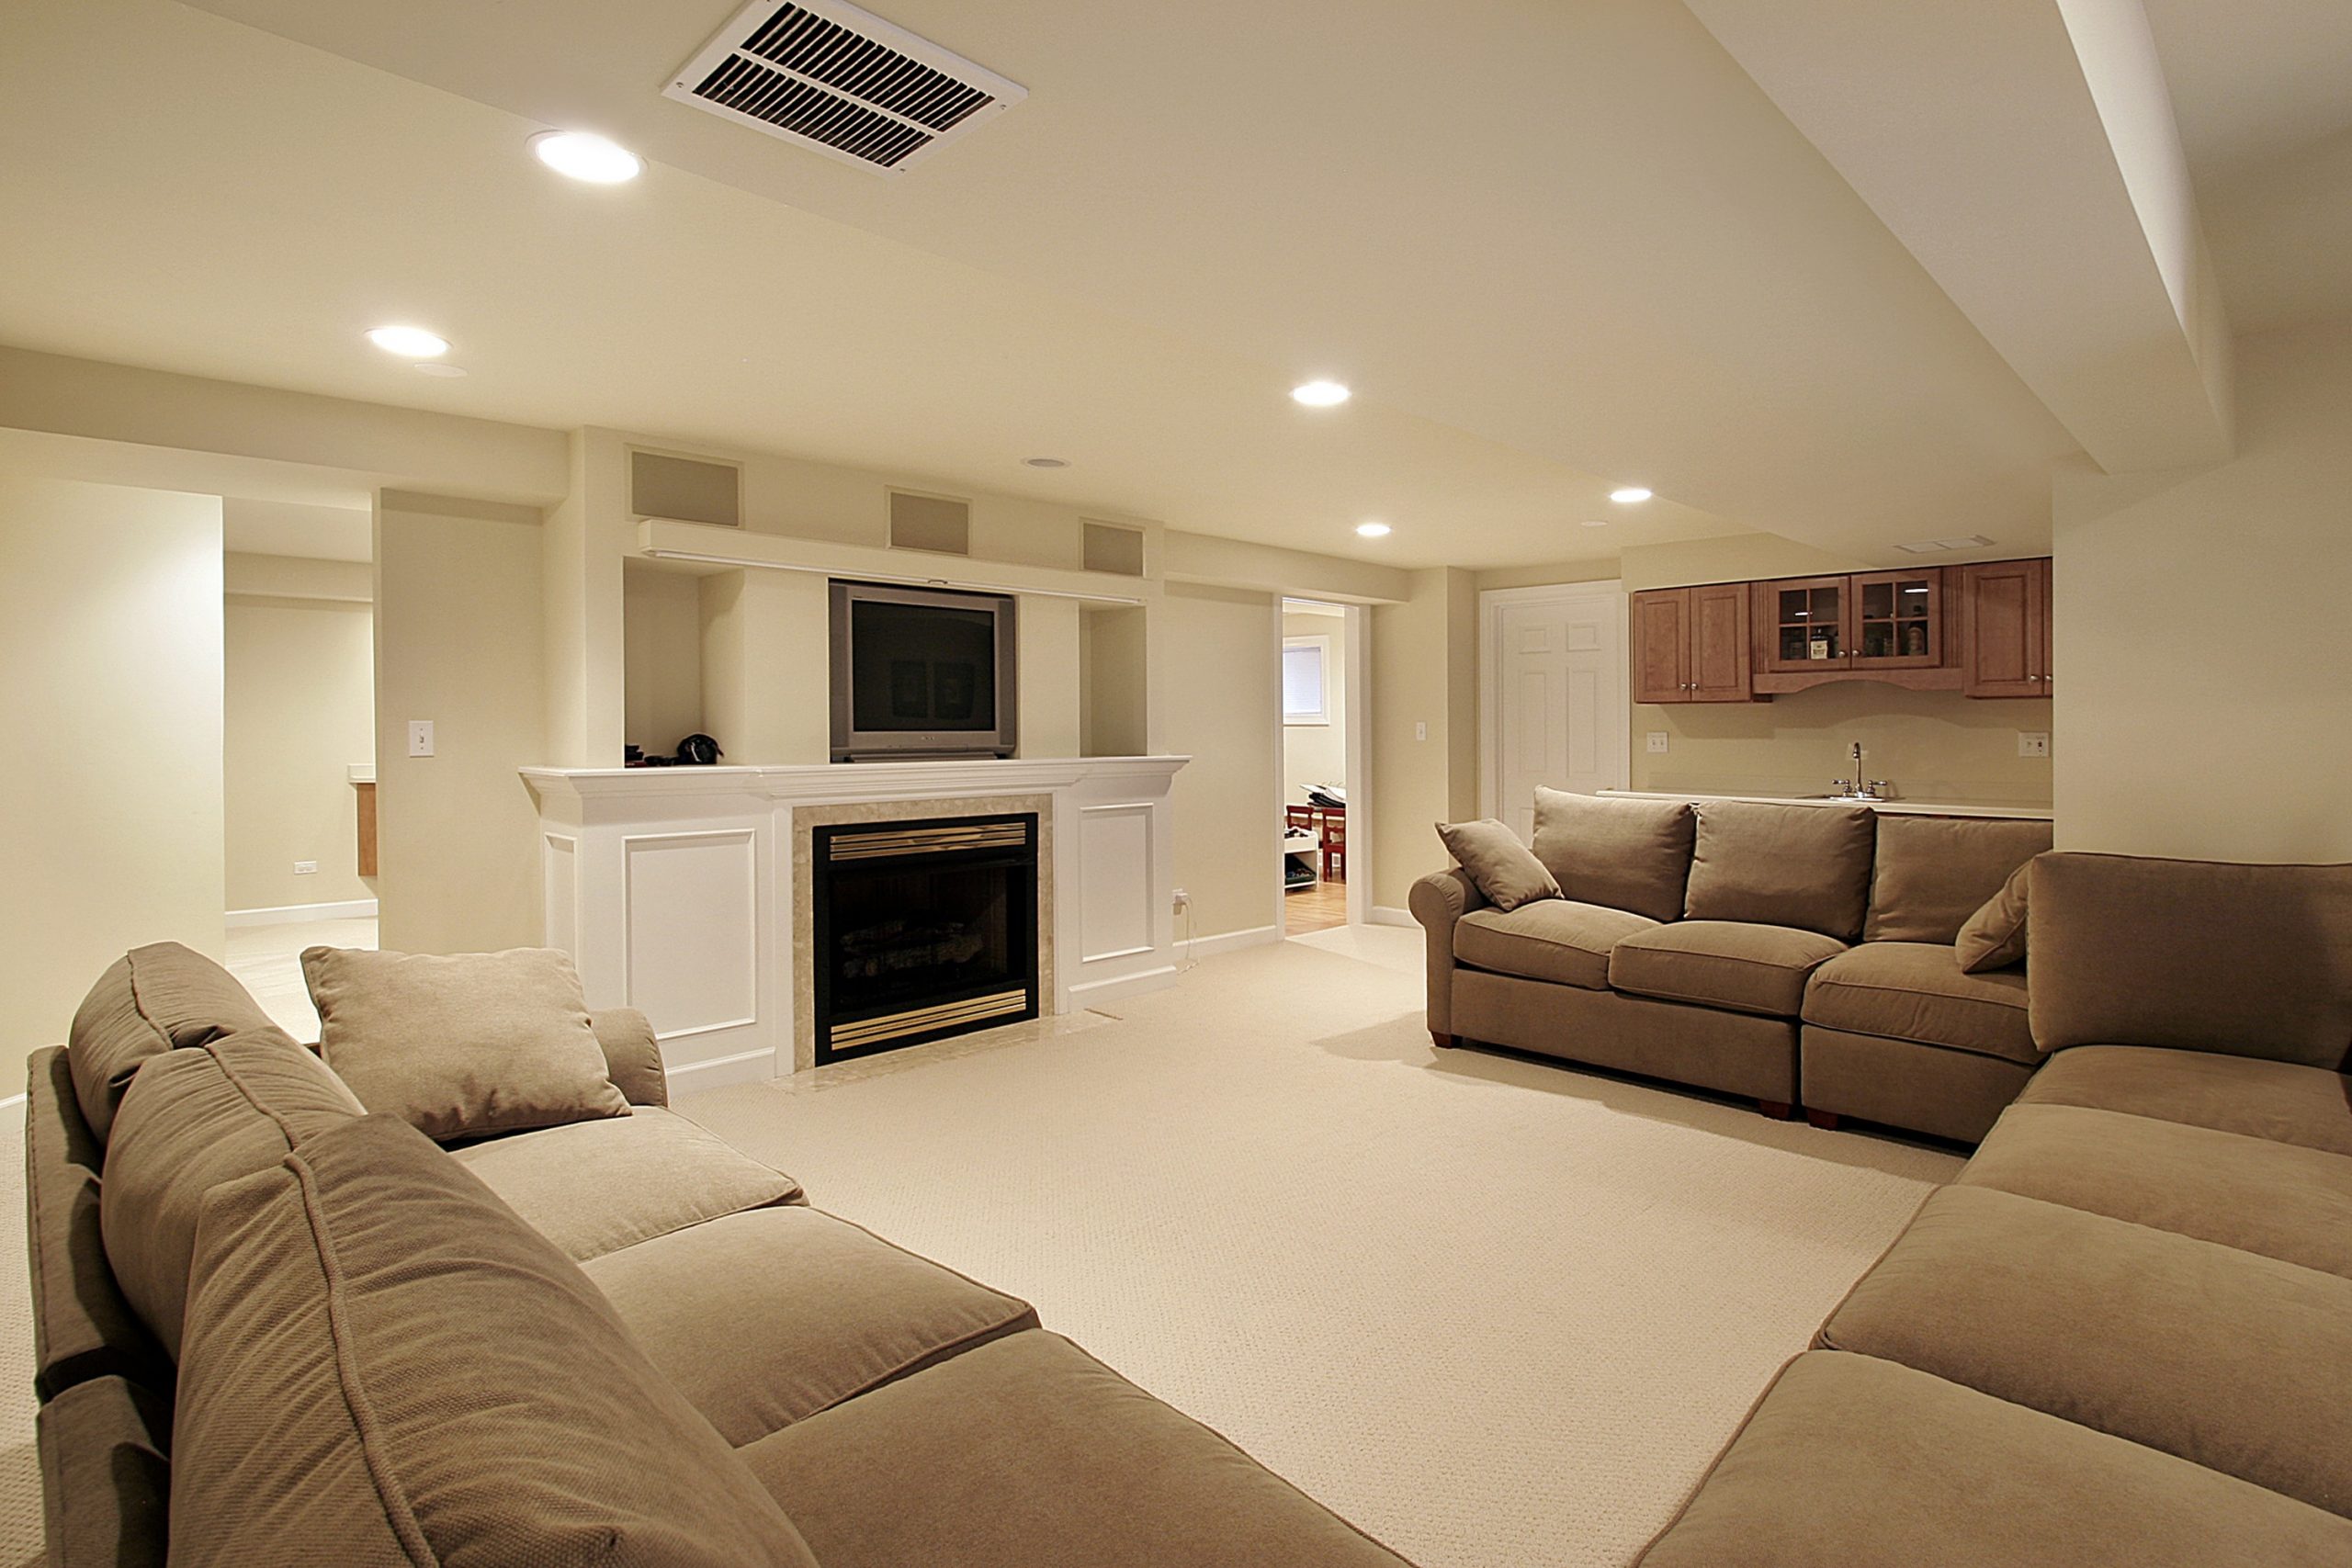 FINISHING A BASEMENT REC ROOM   How to Avoid the 18 Deadly Mistakes ...